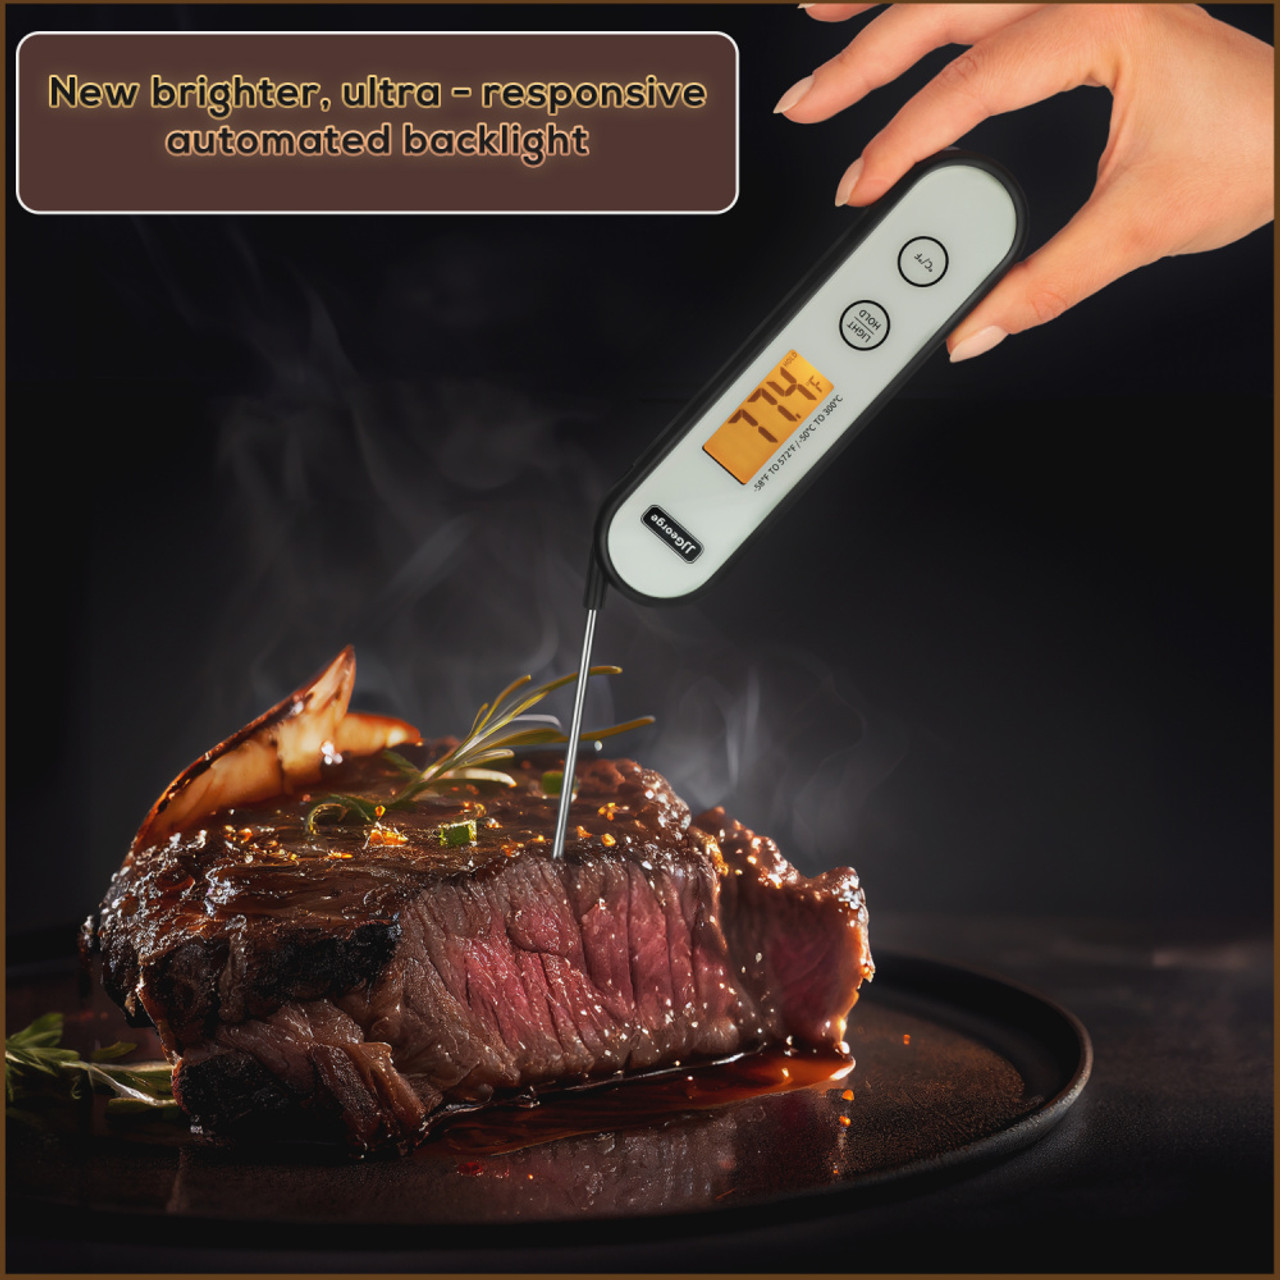 https://cdn11.bigcommerce.com/s-4avkif/images/stencil/1280x1280/products/197/777/Meat_thermometer_for_grilling__19996.1698844698.jpg?c=2